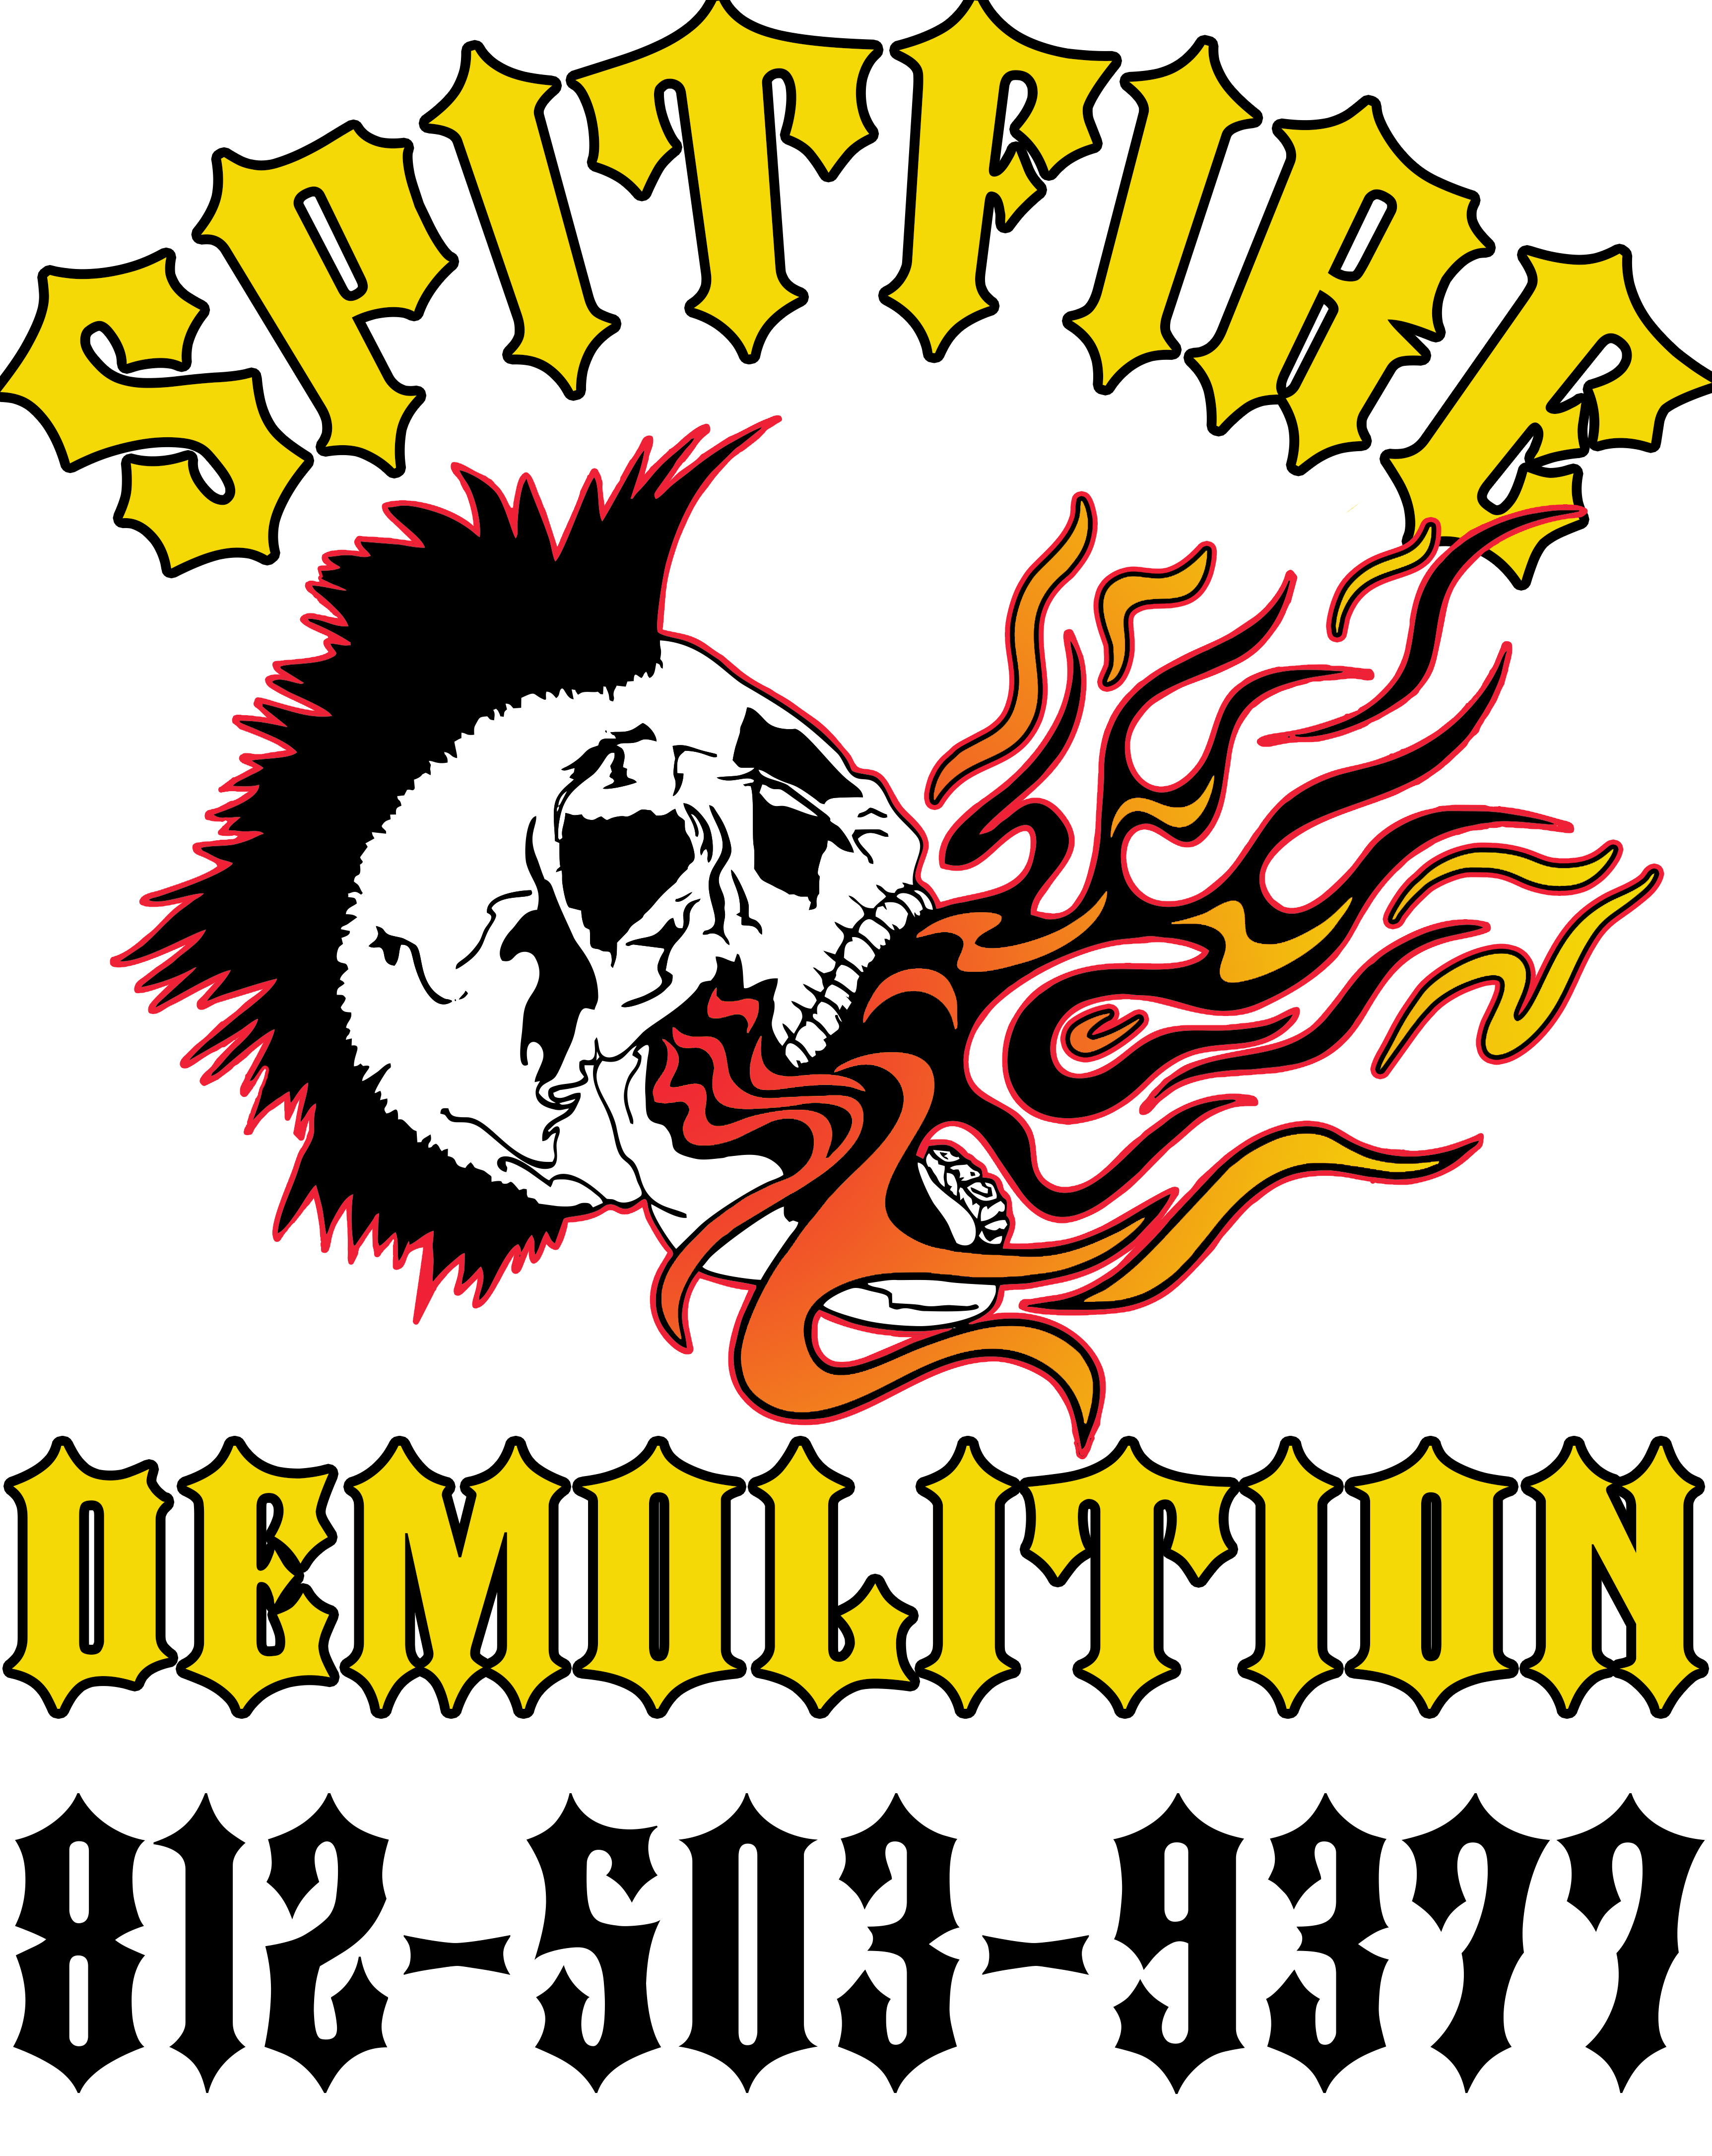 Spitfire Demolition and Outdoor Home Services logo